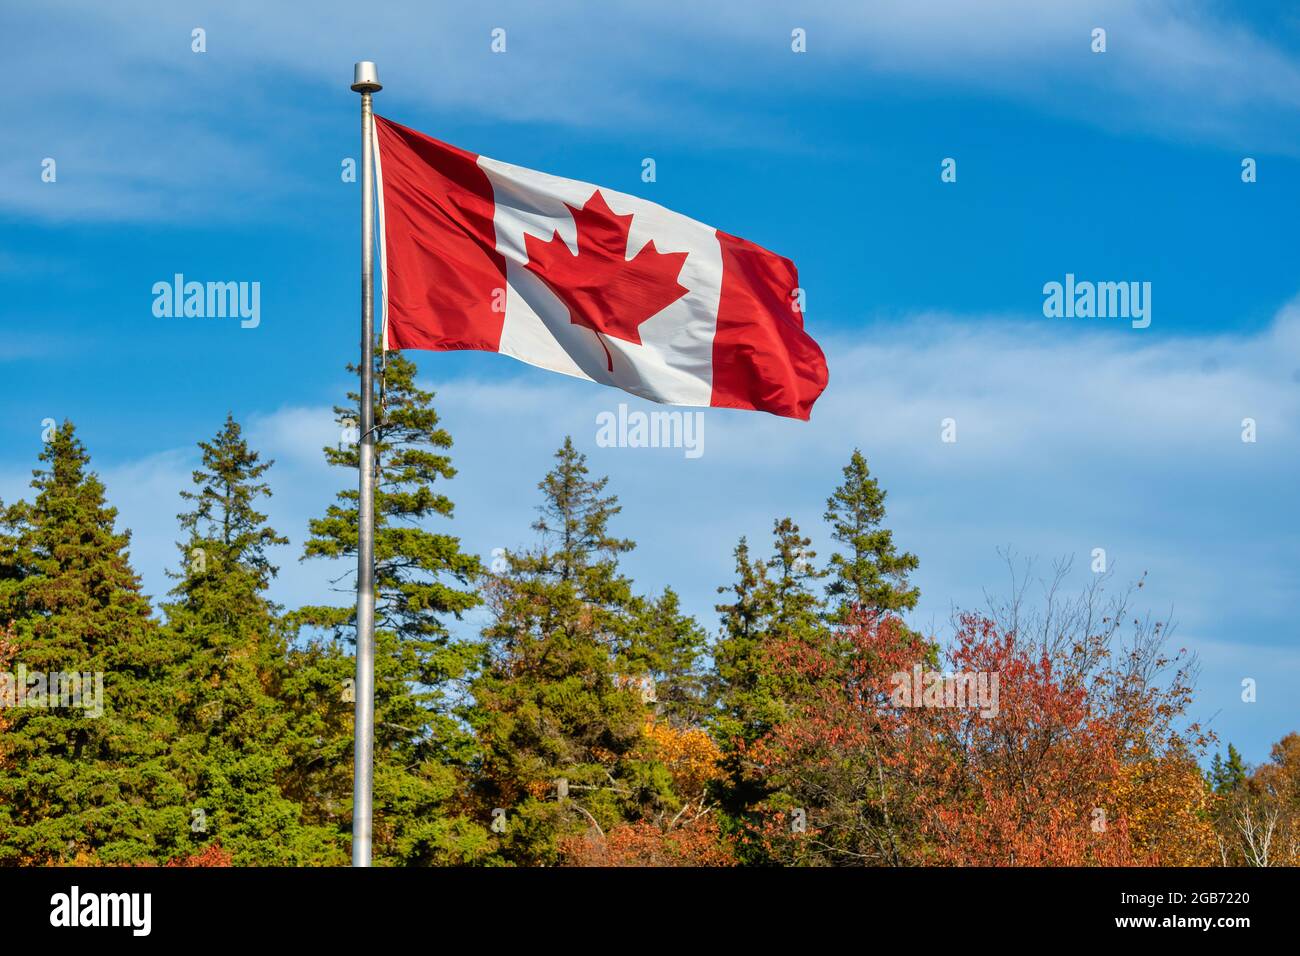 Canadian flag flying in a brisk wind over an autumn landscape. Stock Photo